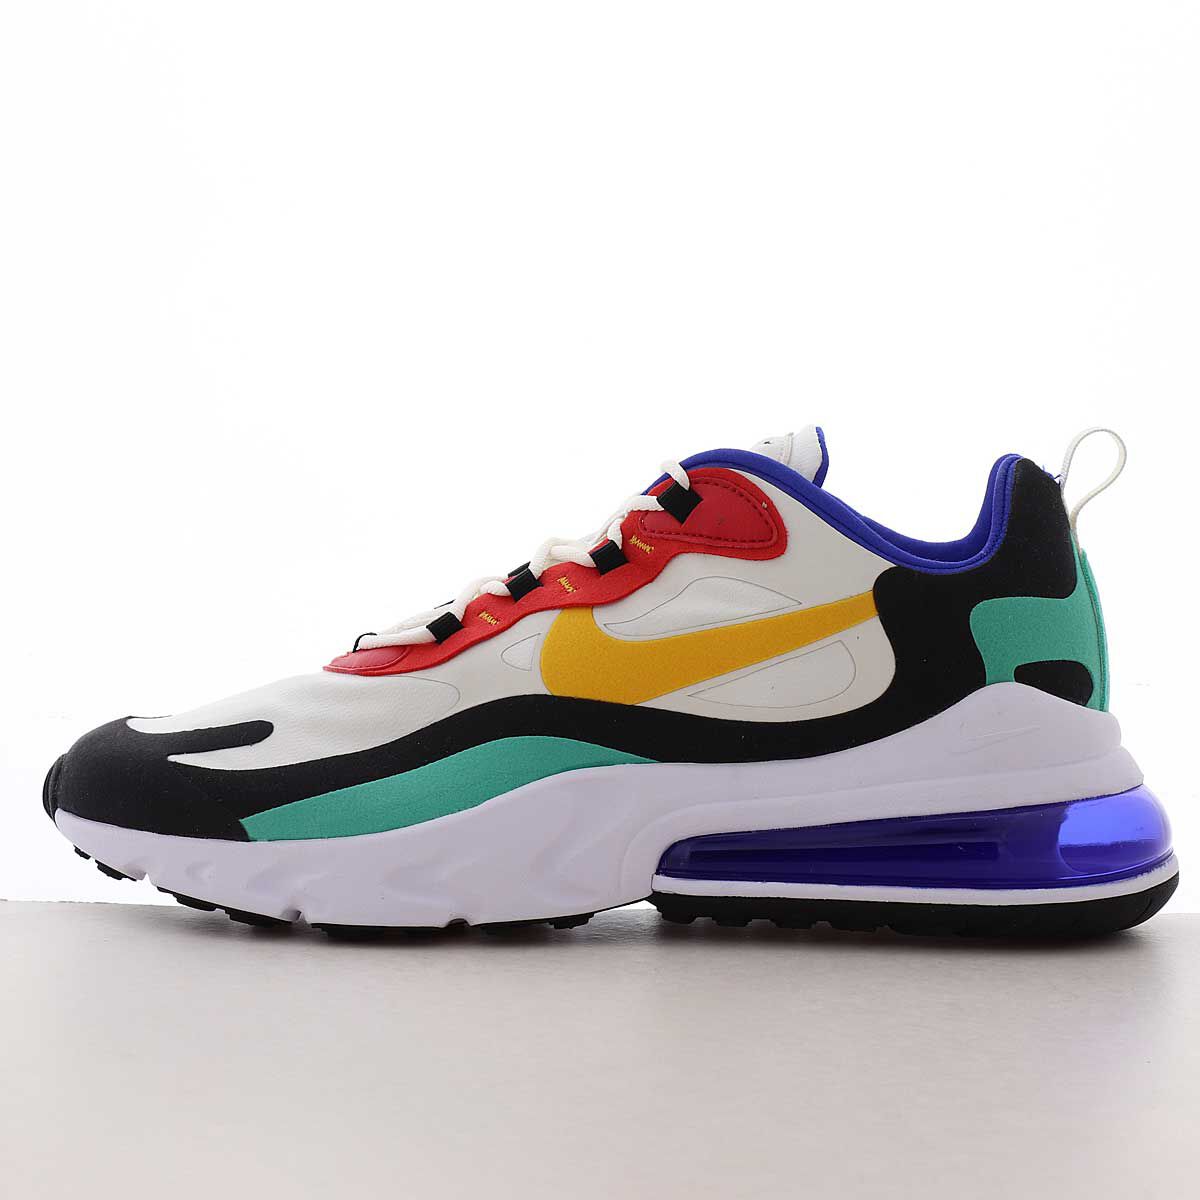 Buy AIR MAX 270 REACT for N/A 0.0 on 